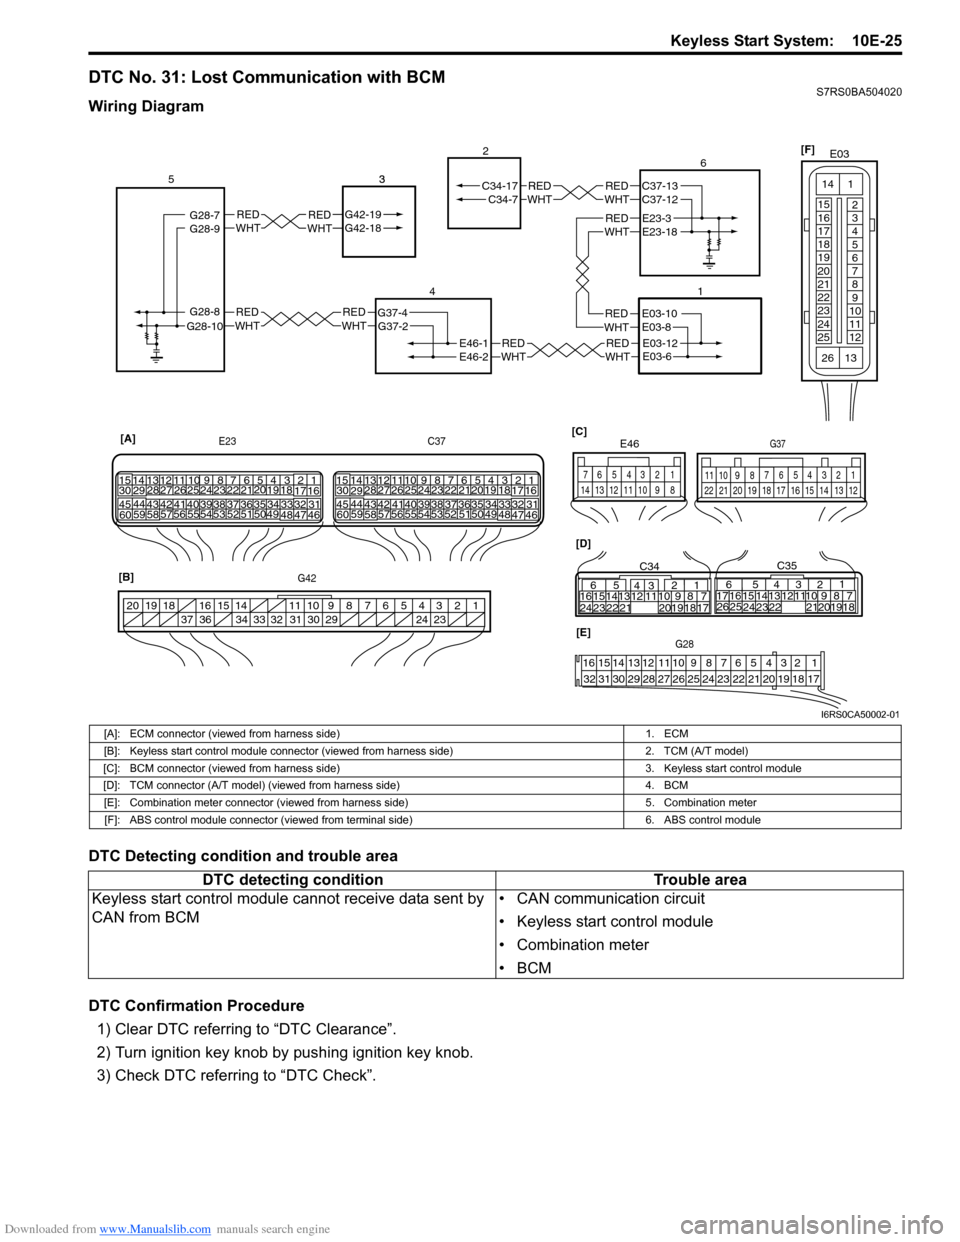 SUZUKI SWIFT 2006 2.G Service Workshop Manual Downloaded from www.Manualslib.com manuals search engine Keyless Start System:  10E-25
DTC No. 31: Lost Communication with BCMS7RS0BA504020
Wiring Diagram
DTC Detecting condition and trouble area
DTC 